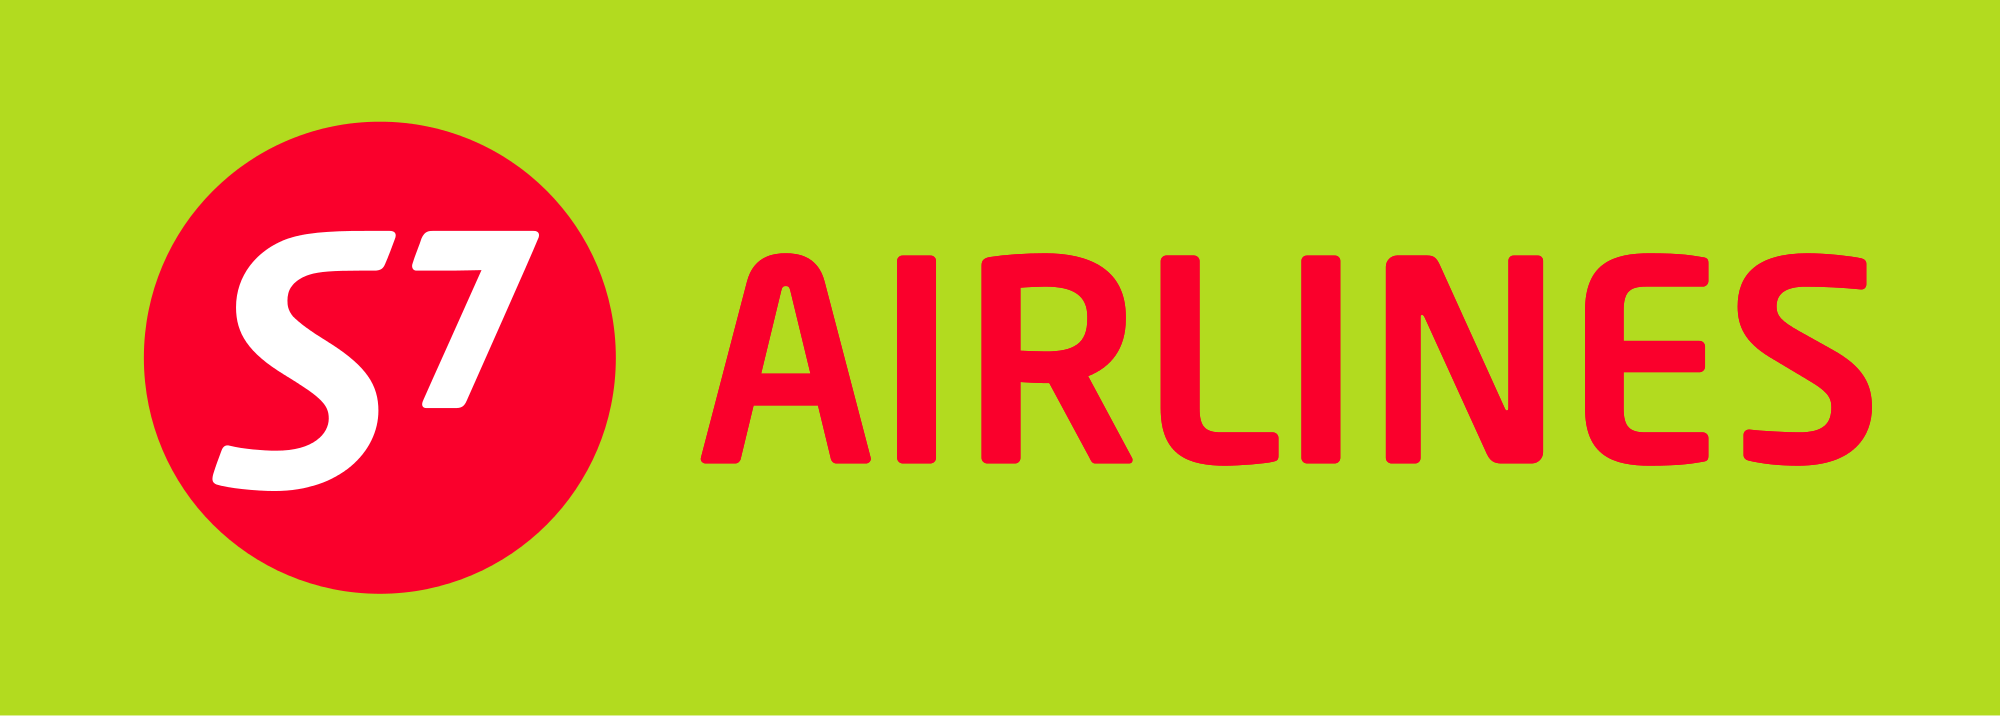 S7 Logo - File:S7 Airlines Green Logo.svg - Wikimedia Commons